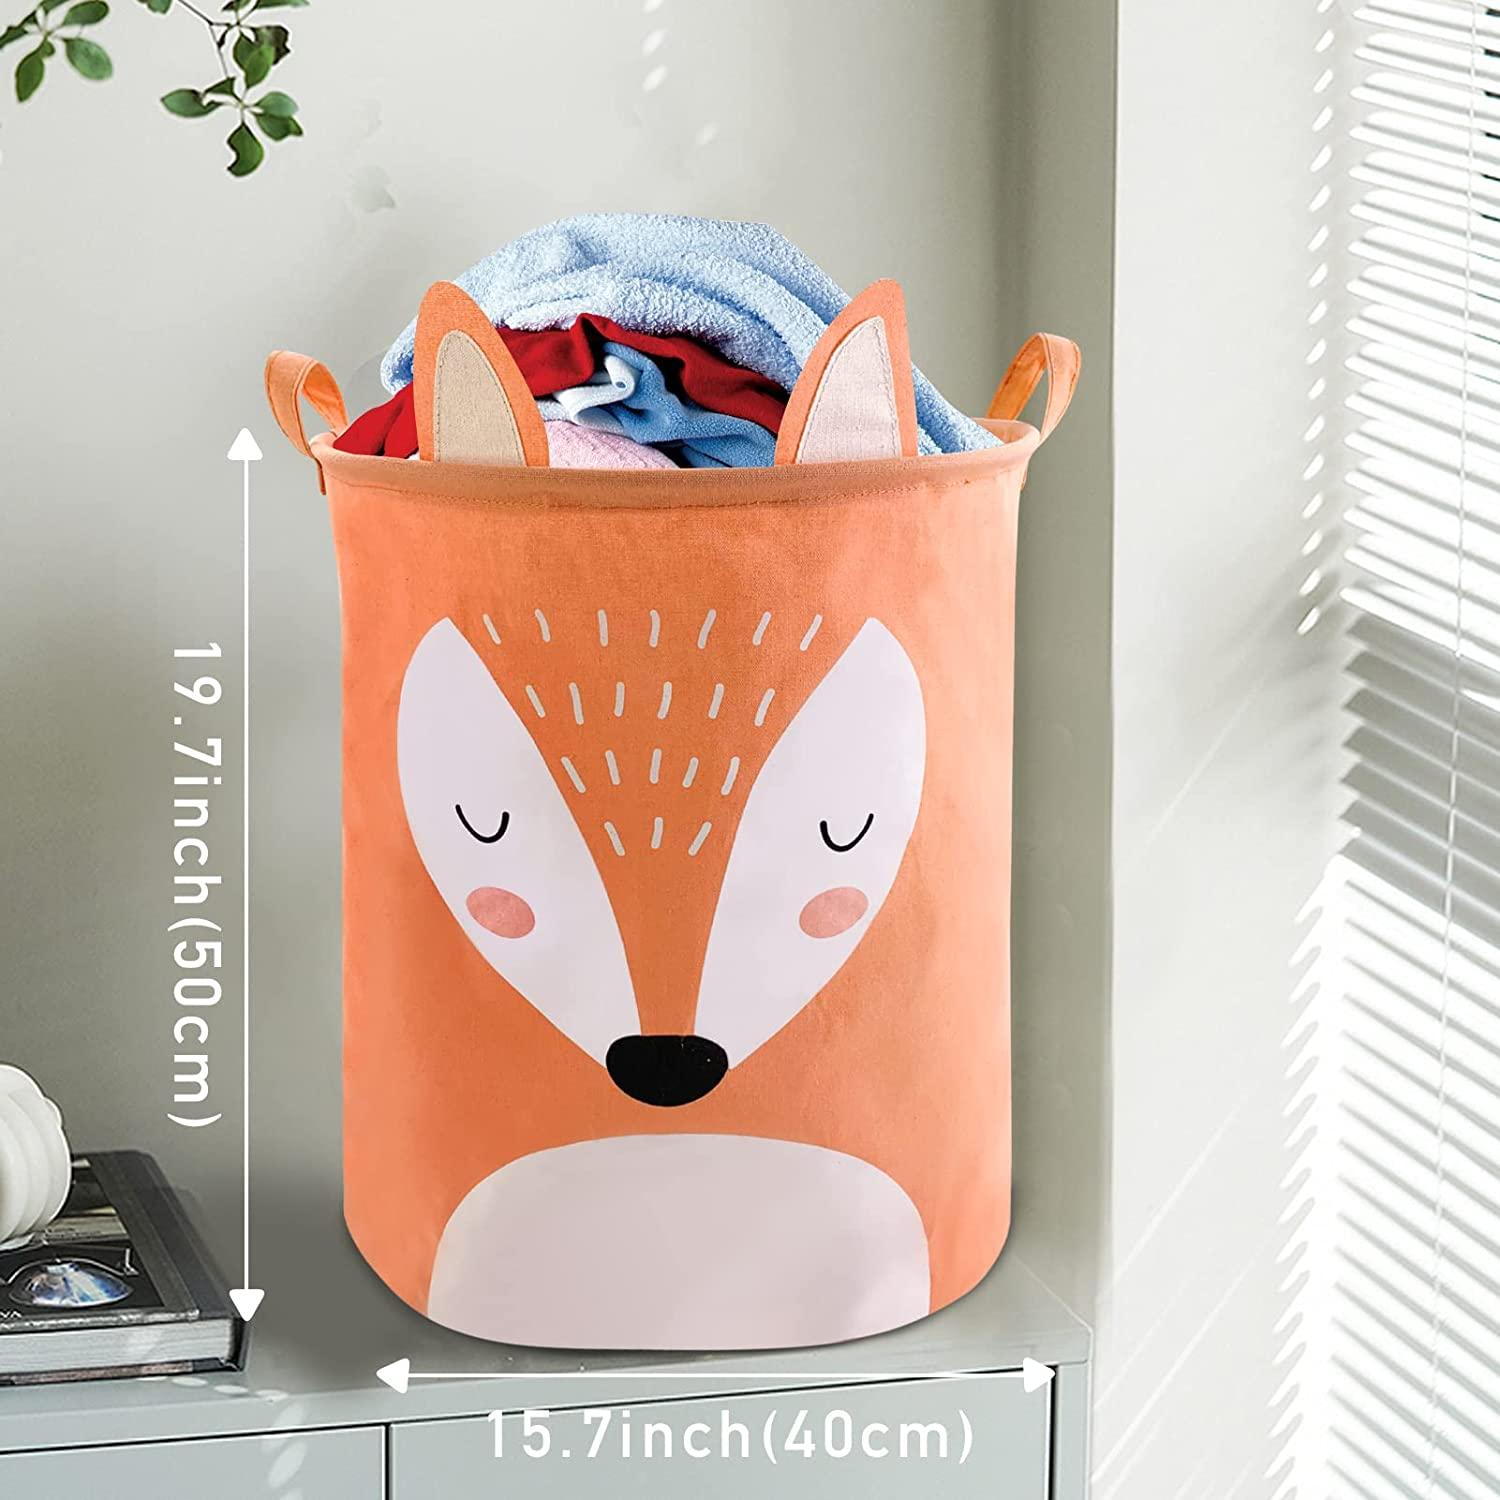 Collapsible Laundry Basket